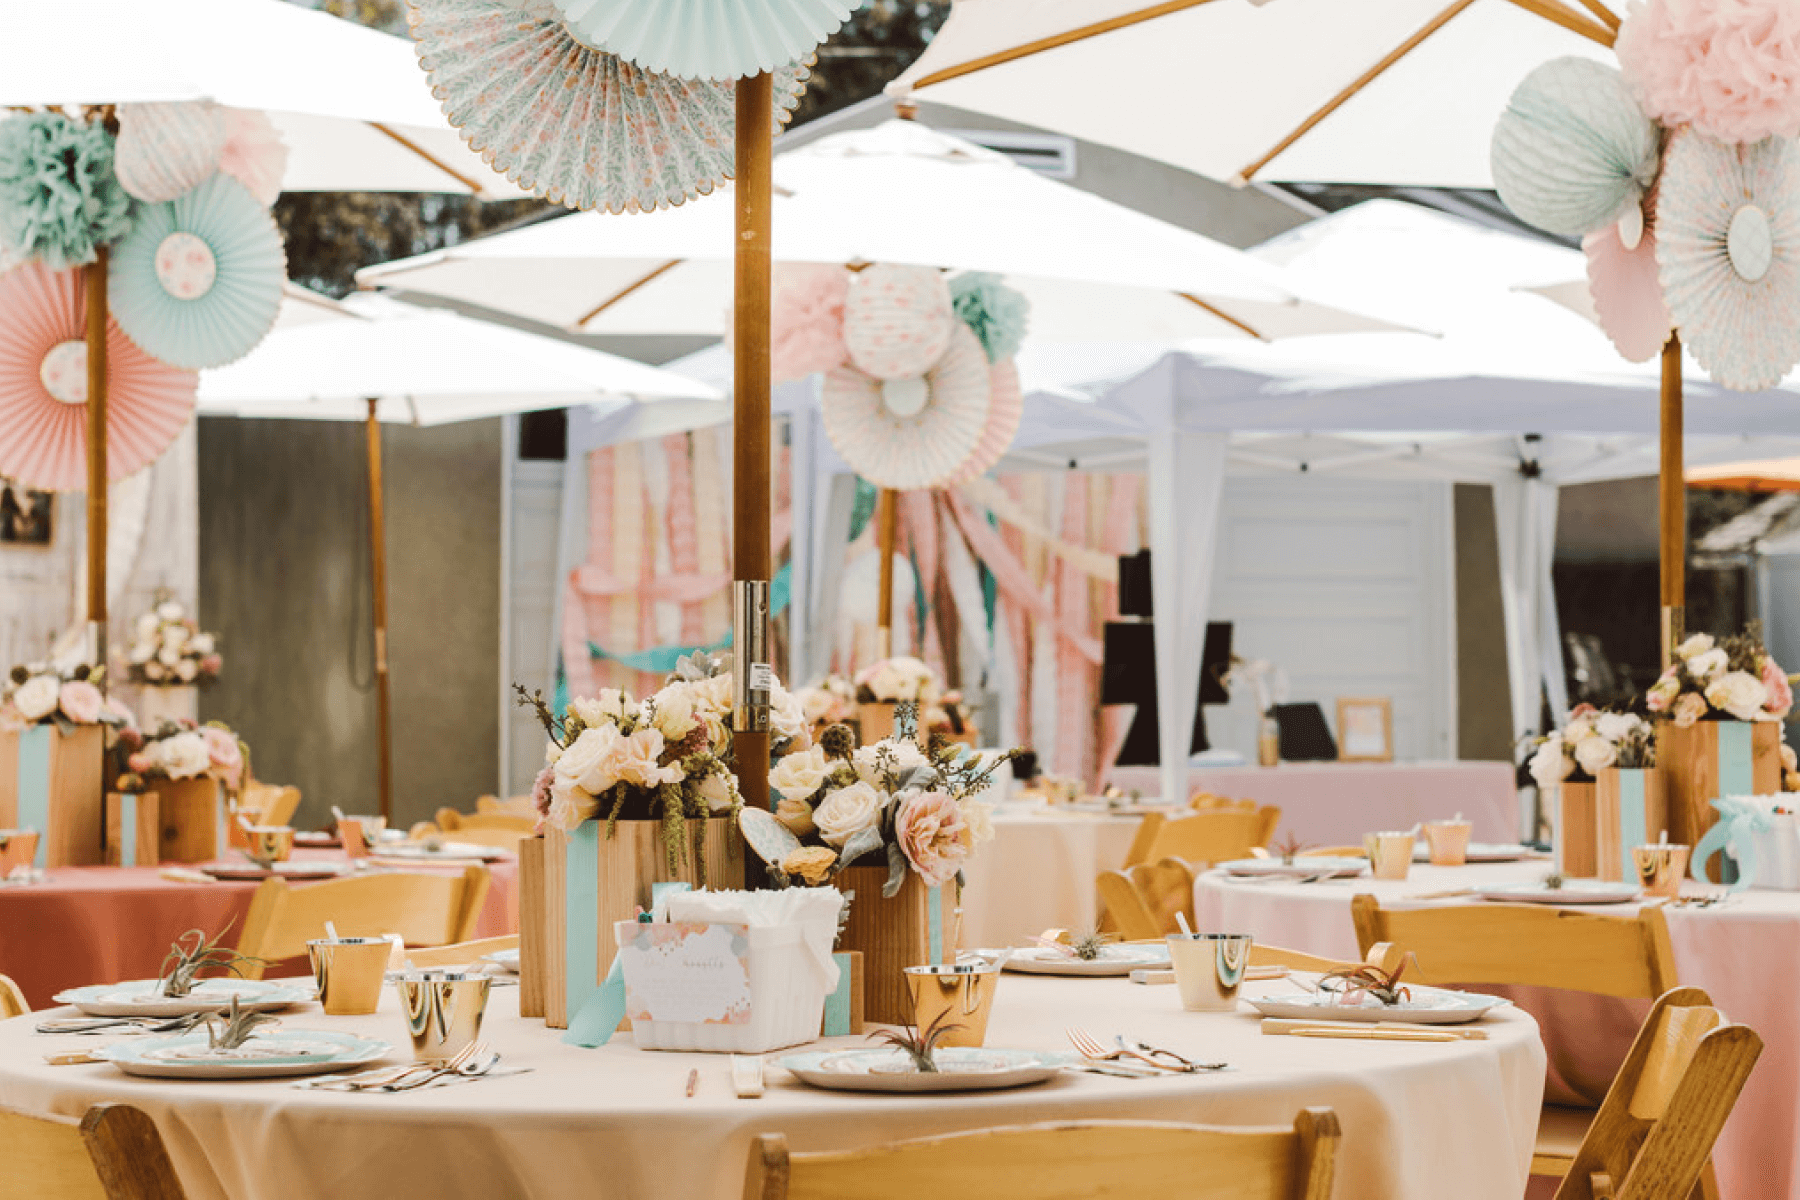 outdoor tables and umbrellas with pastel party decorations